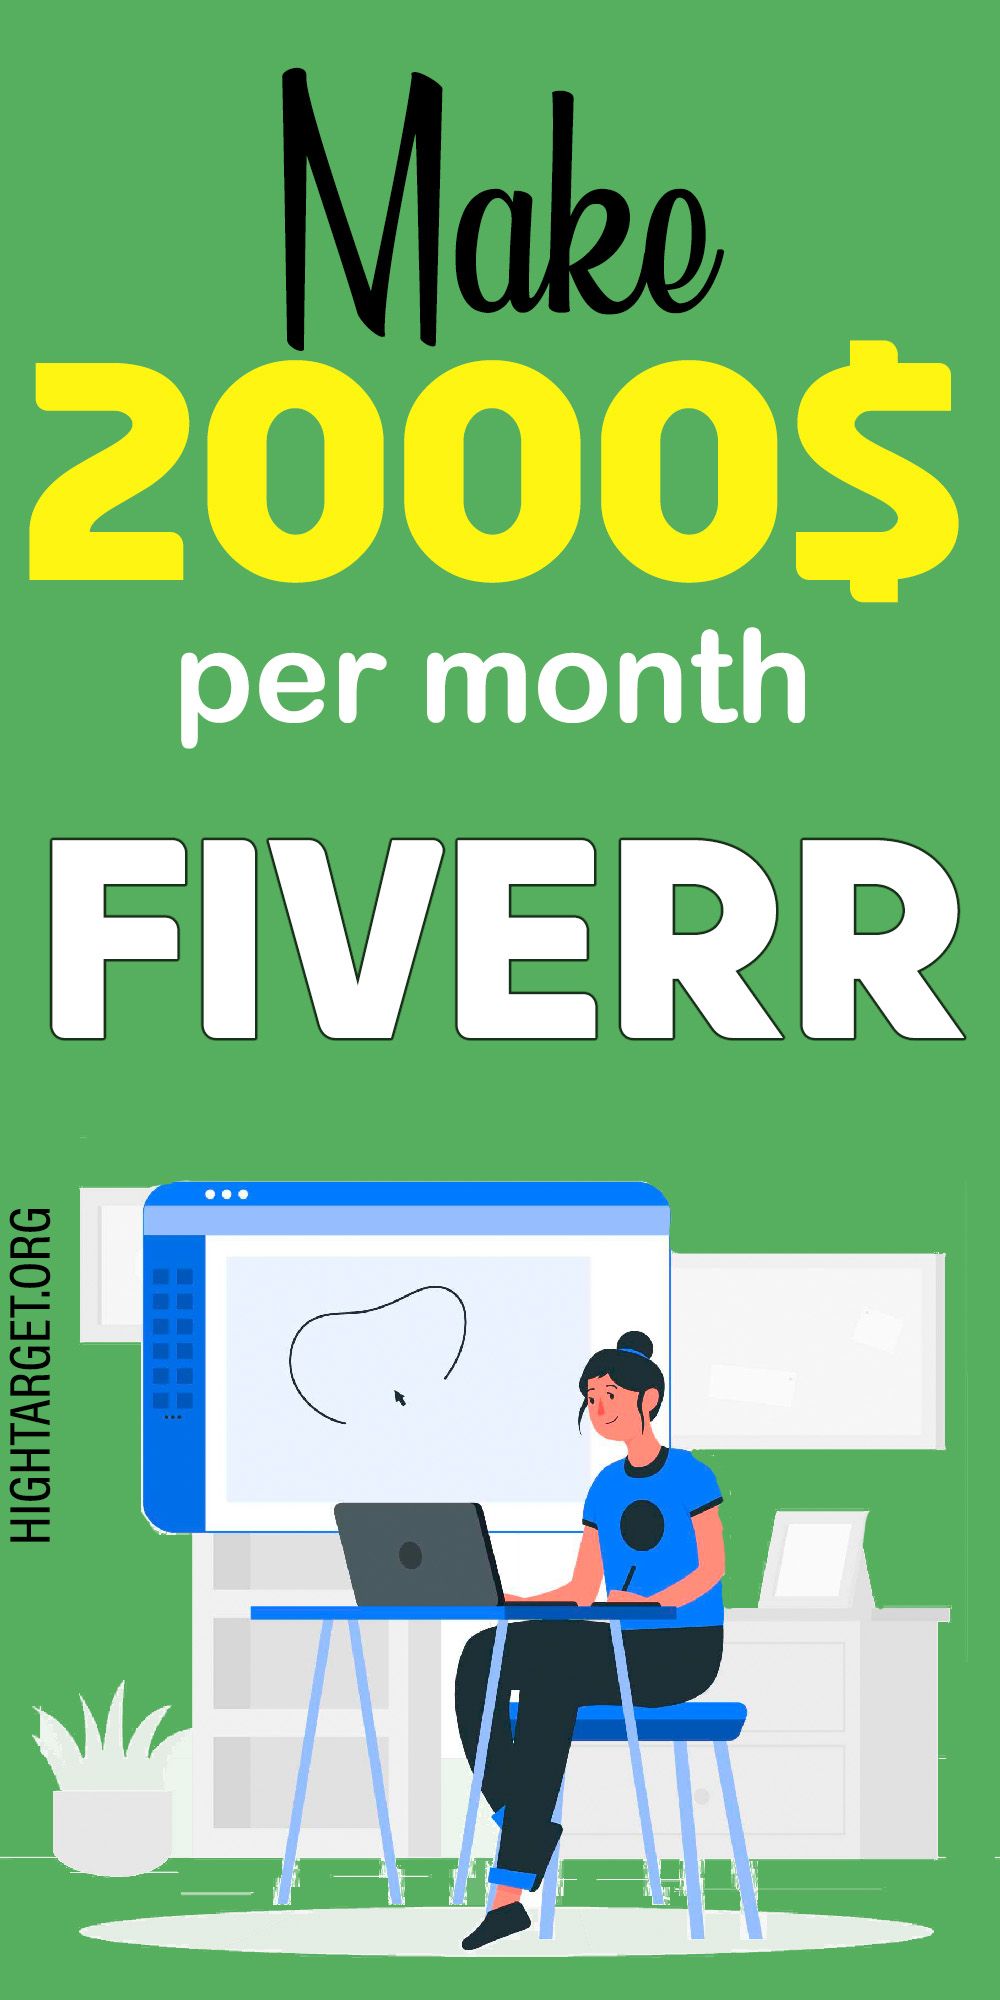 Learn About Fiverr Level 1 Benefits: A Step-by-Step Guide